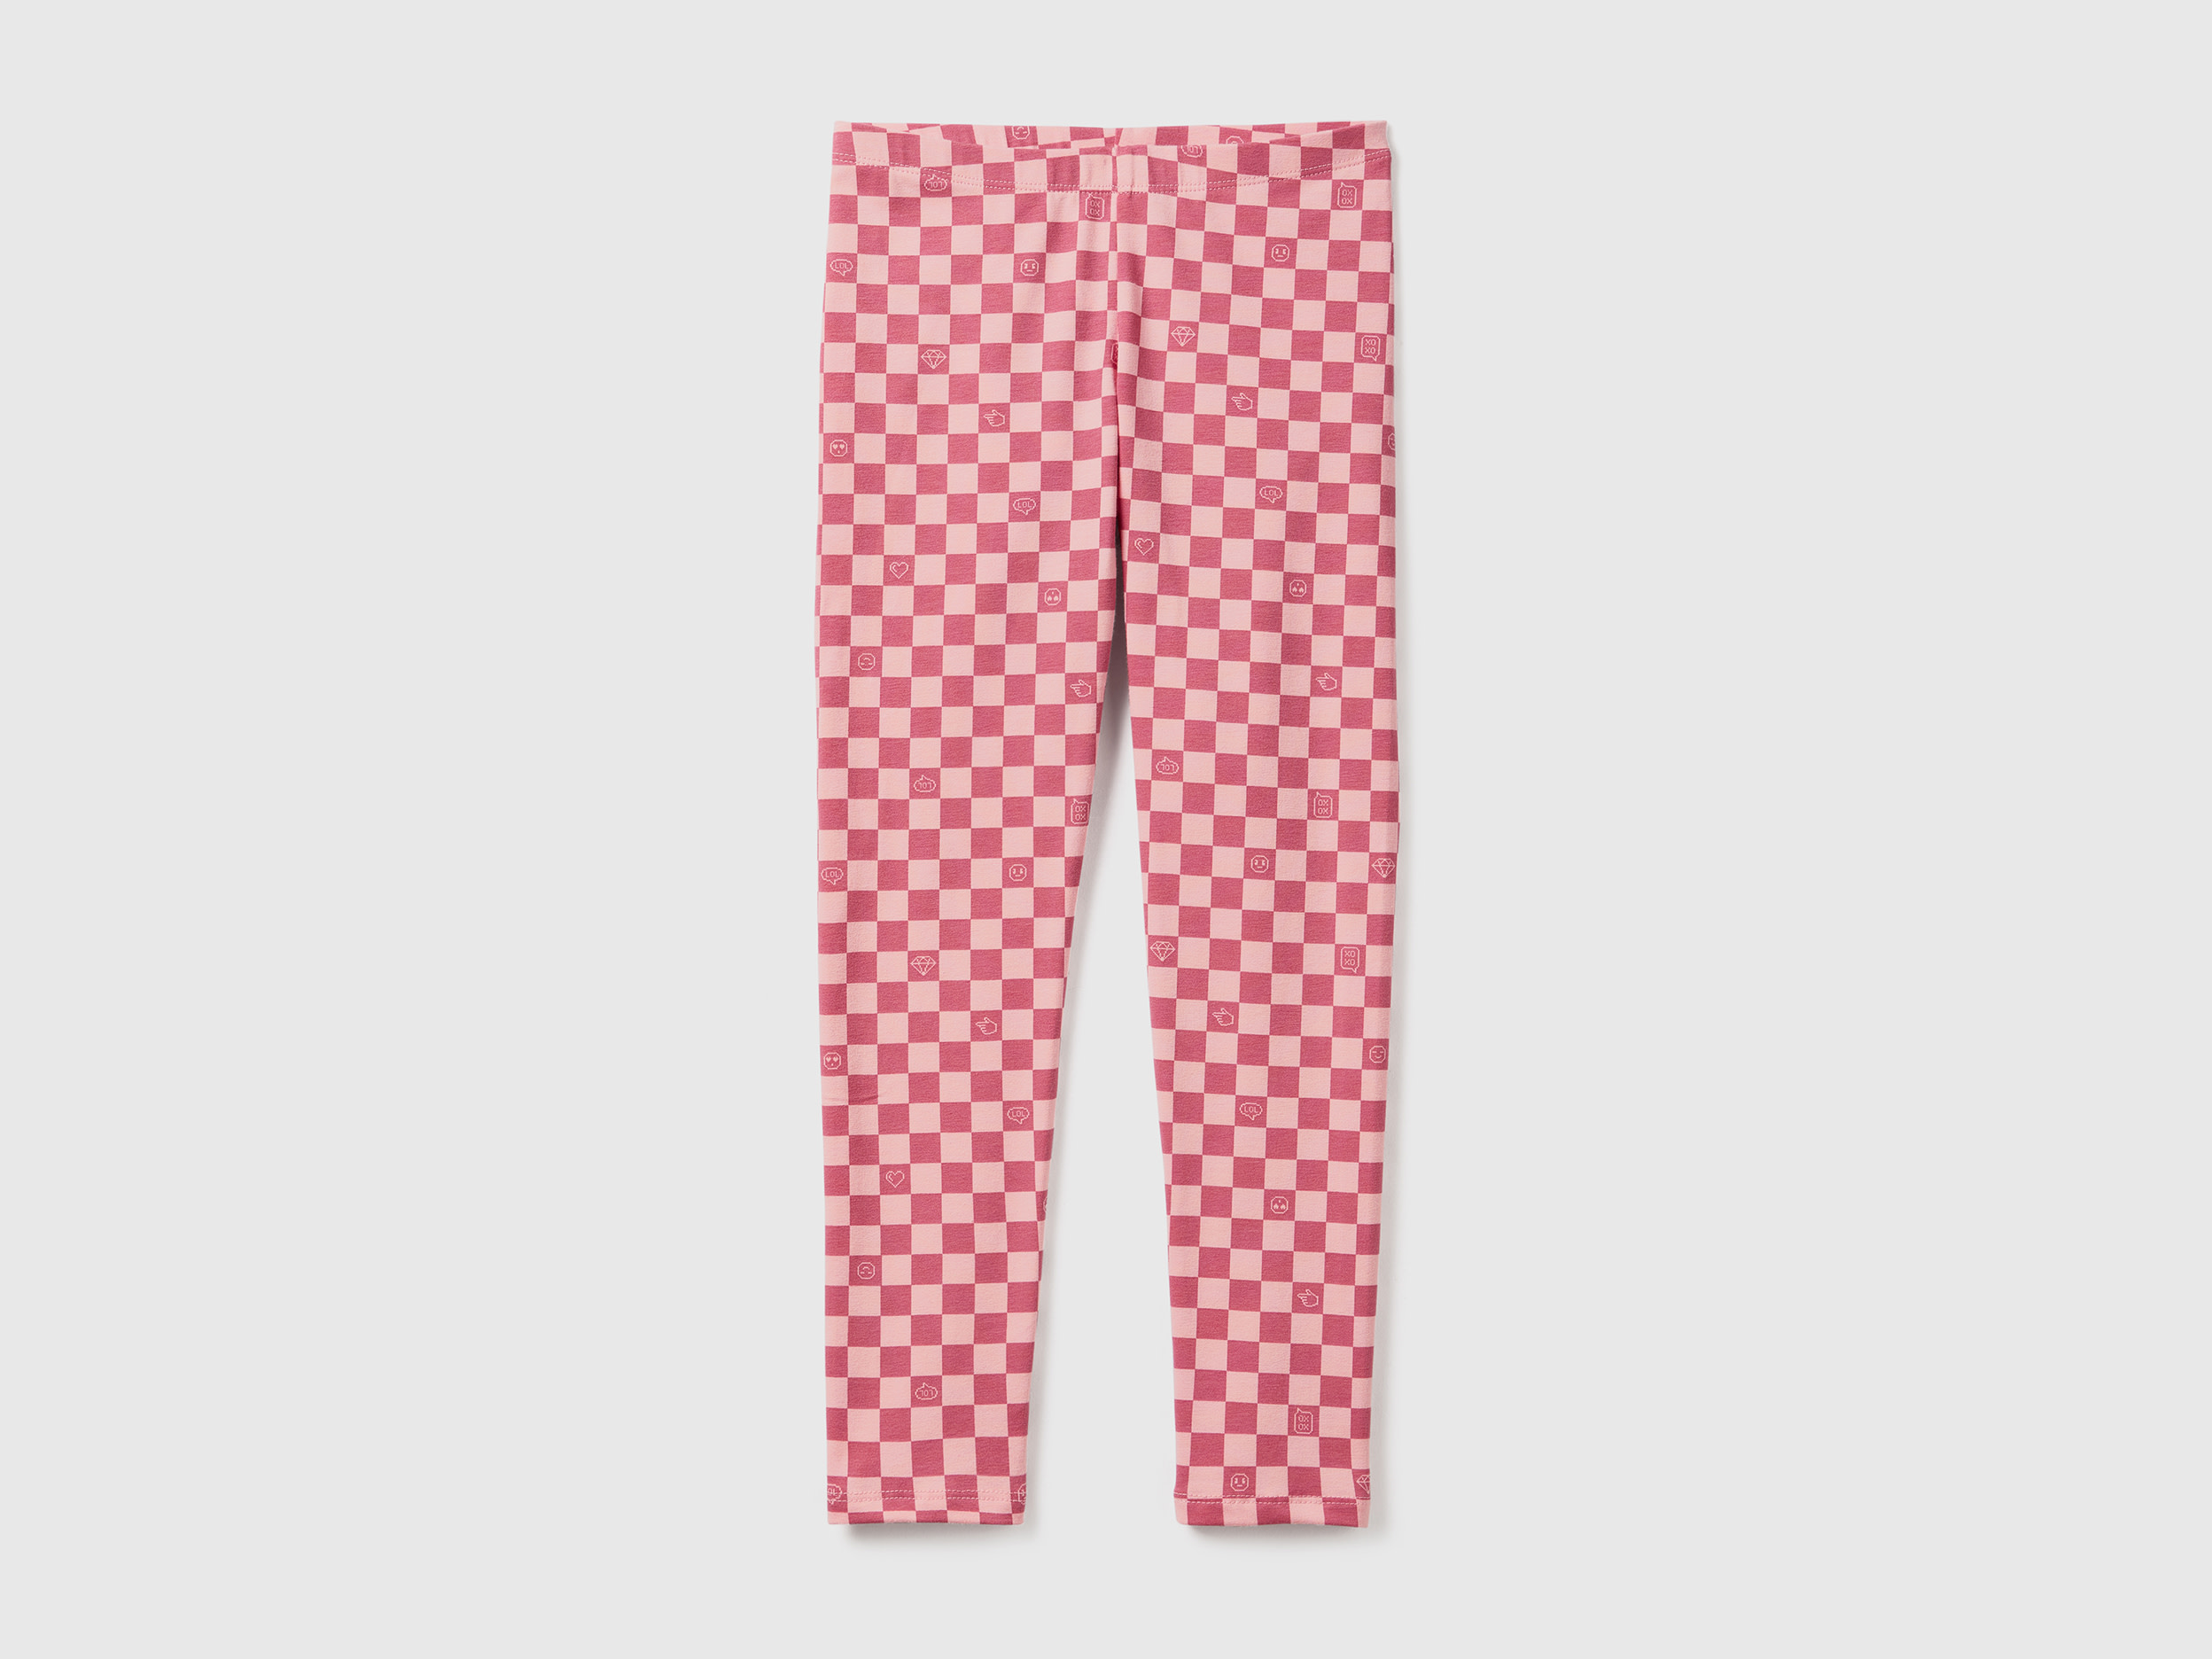 Benetton, Checkered Leggings In Stretch Cotton, size 2XL, Pink, Kids